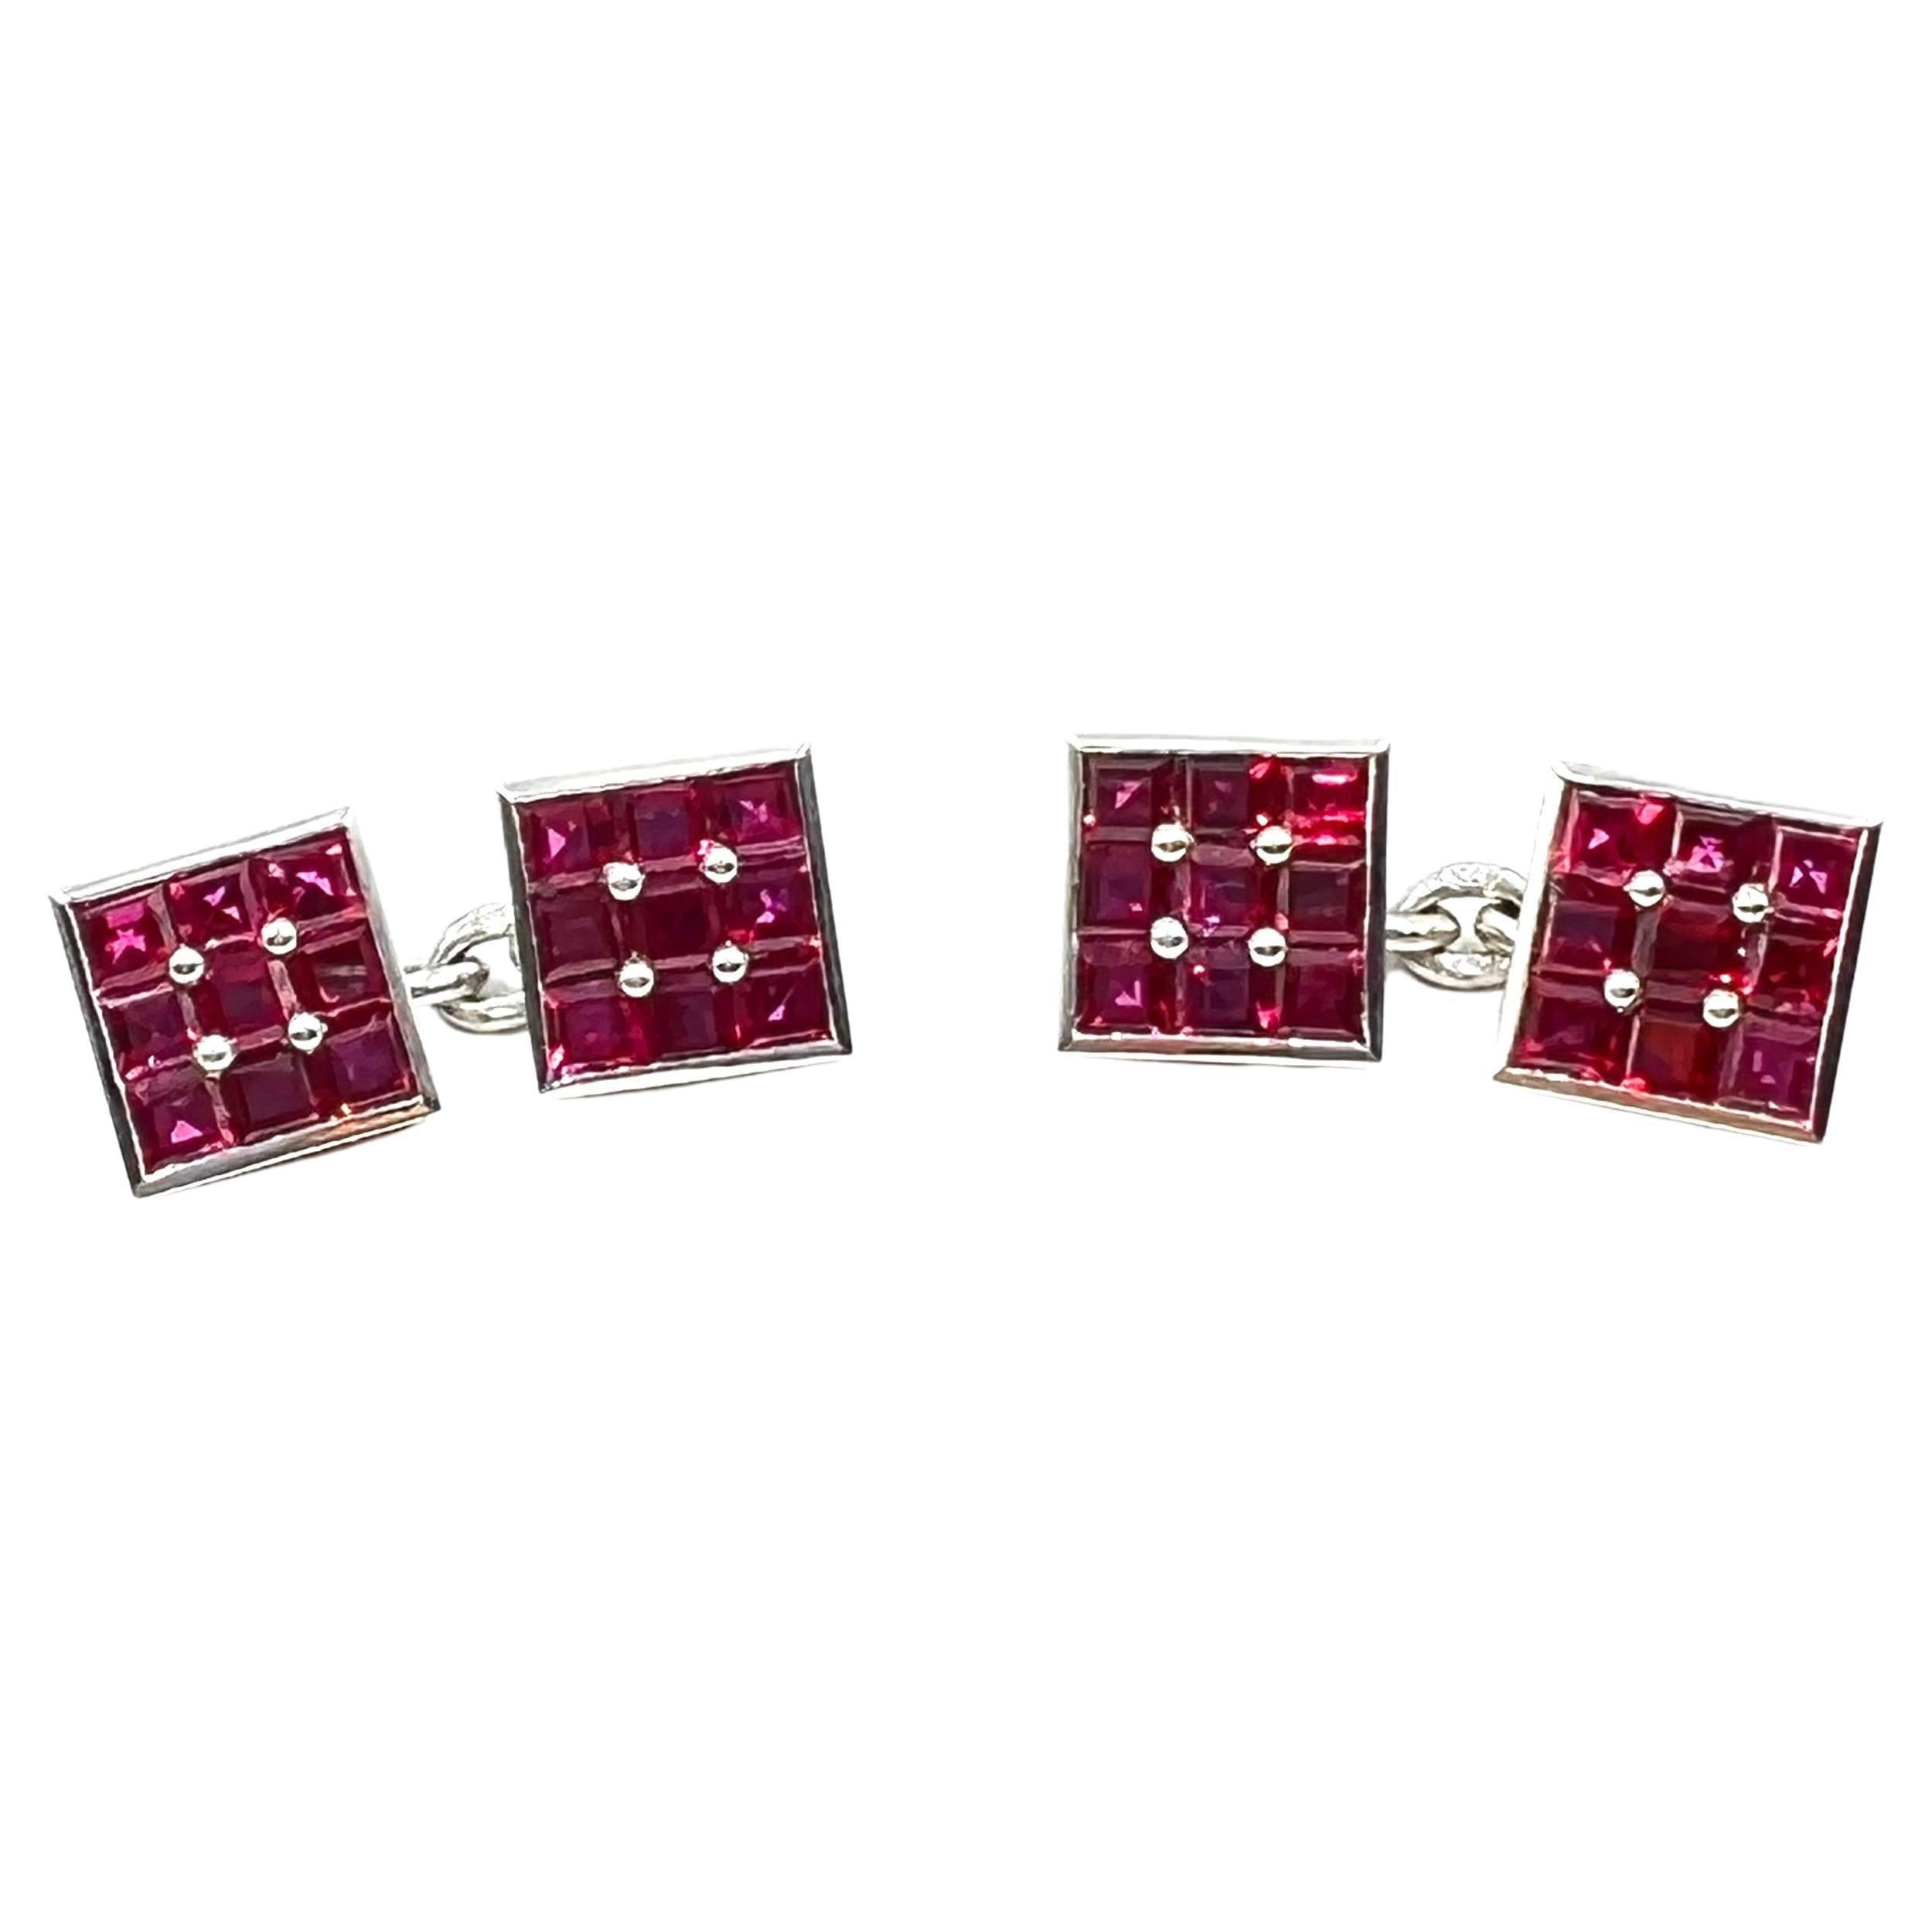 Bvlgari platinum square form French cuff style cufflinks.  Square form design, each calibre set with nine square, step cut, natural rubies measuring approximately 2.5mm each. 36 rubies weighing approximately 4.00 total carats. Signed 